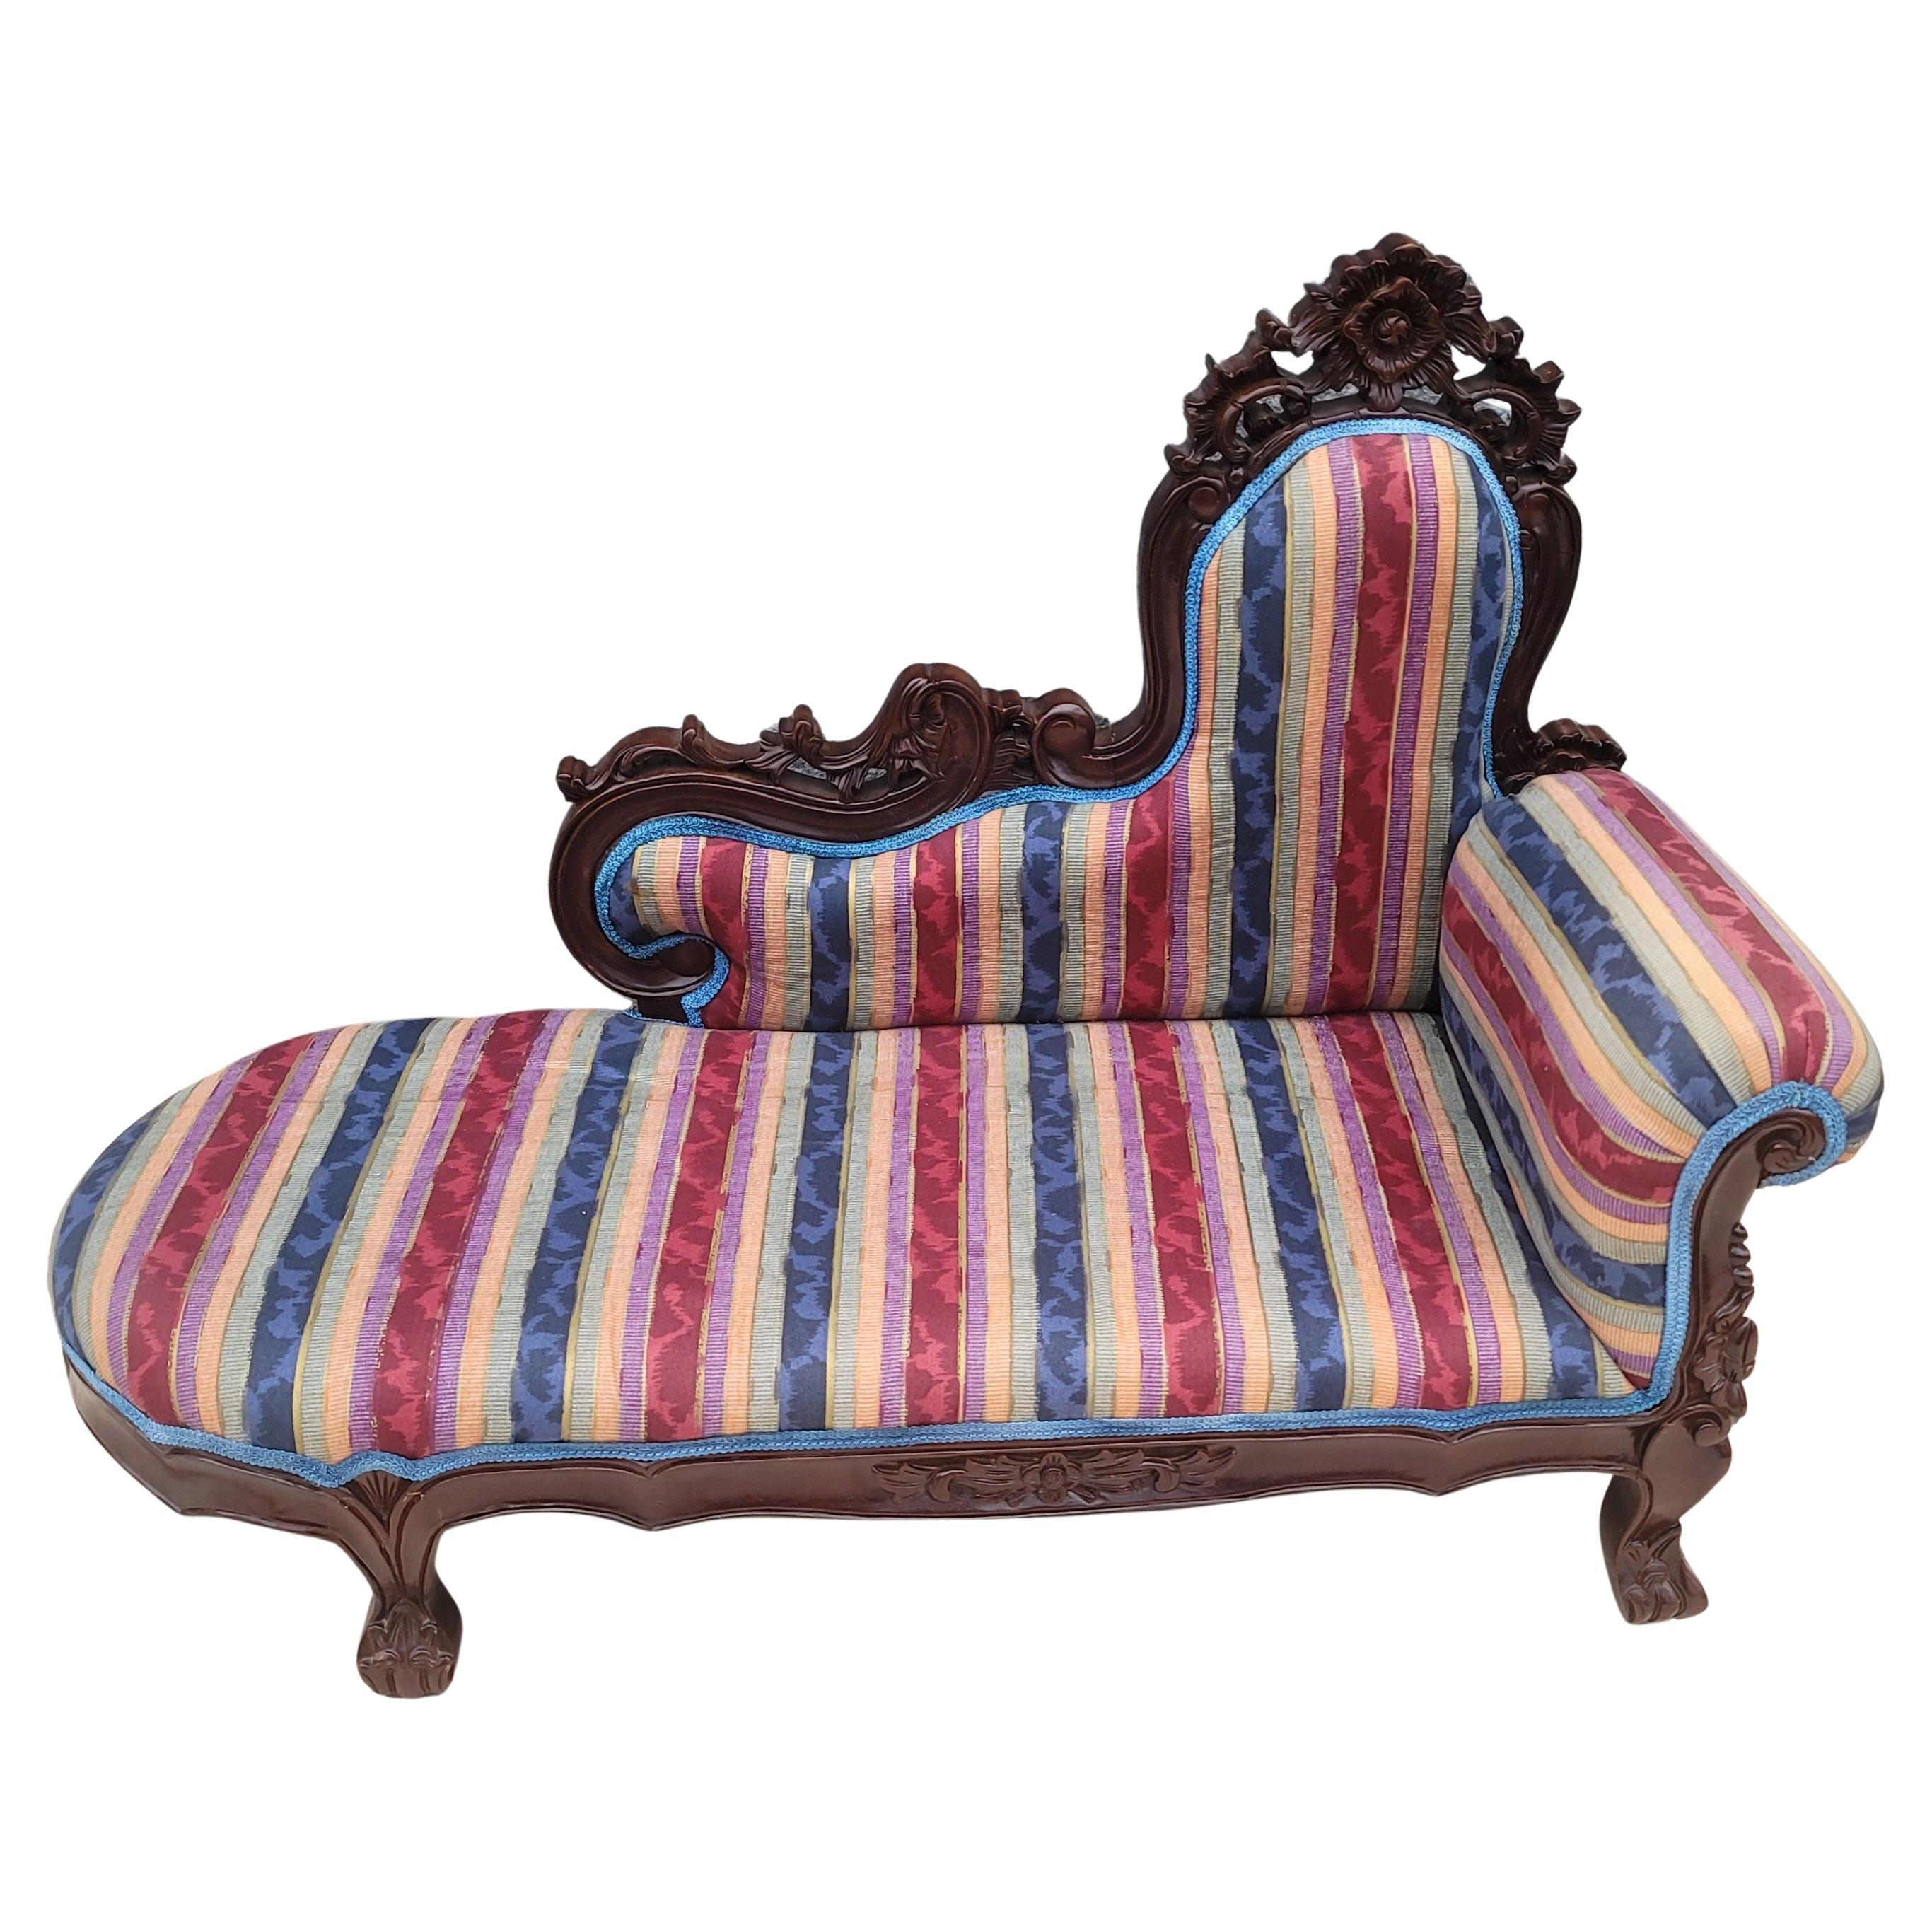 A Rococo style cherry upholstered child size chaise lounge with exquisite carvings and in excellent condition.
Measures 33